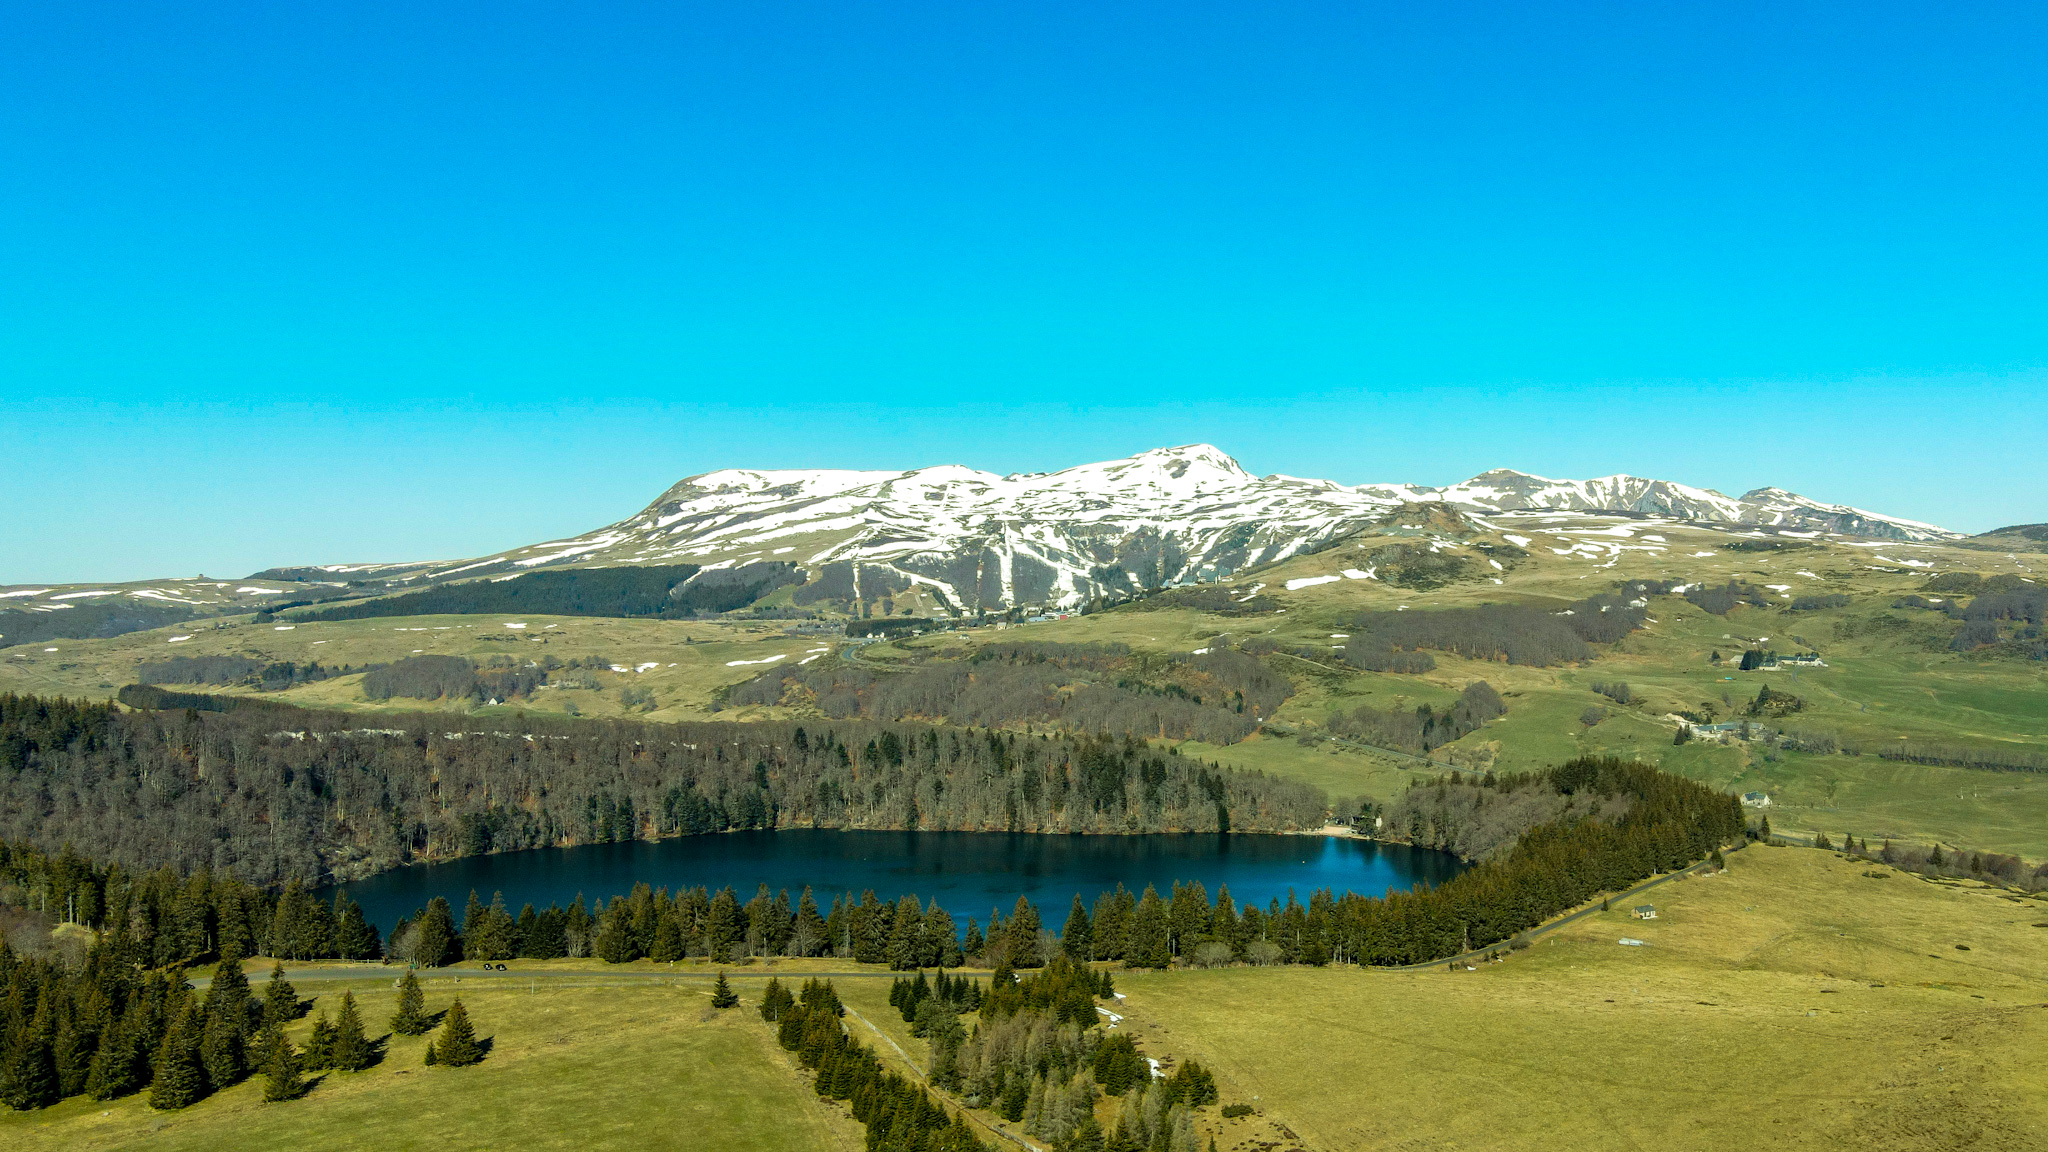 Lake Pavin and the snow-covered resort of Super Besse in Spring